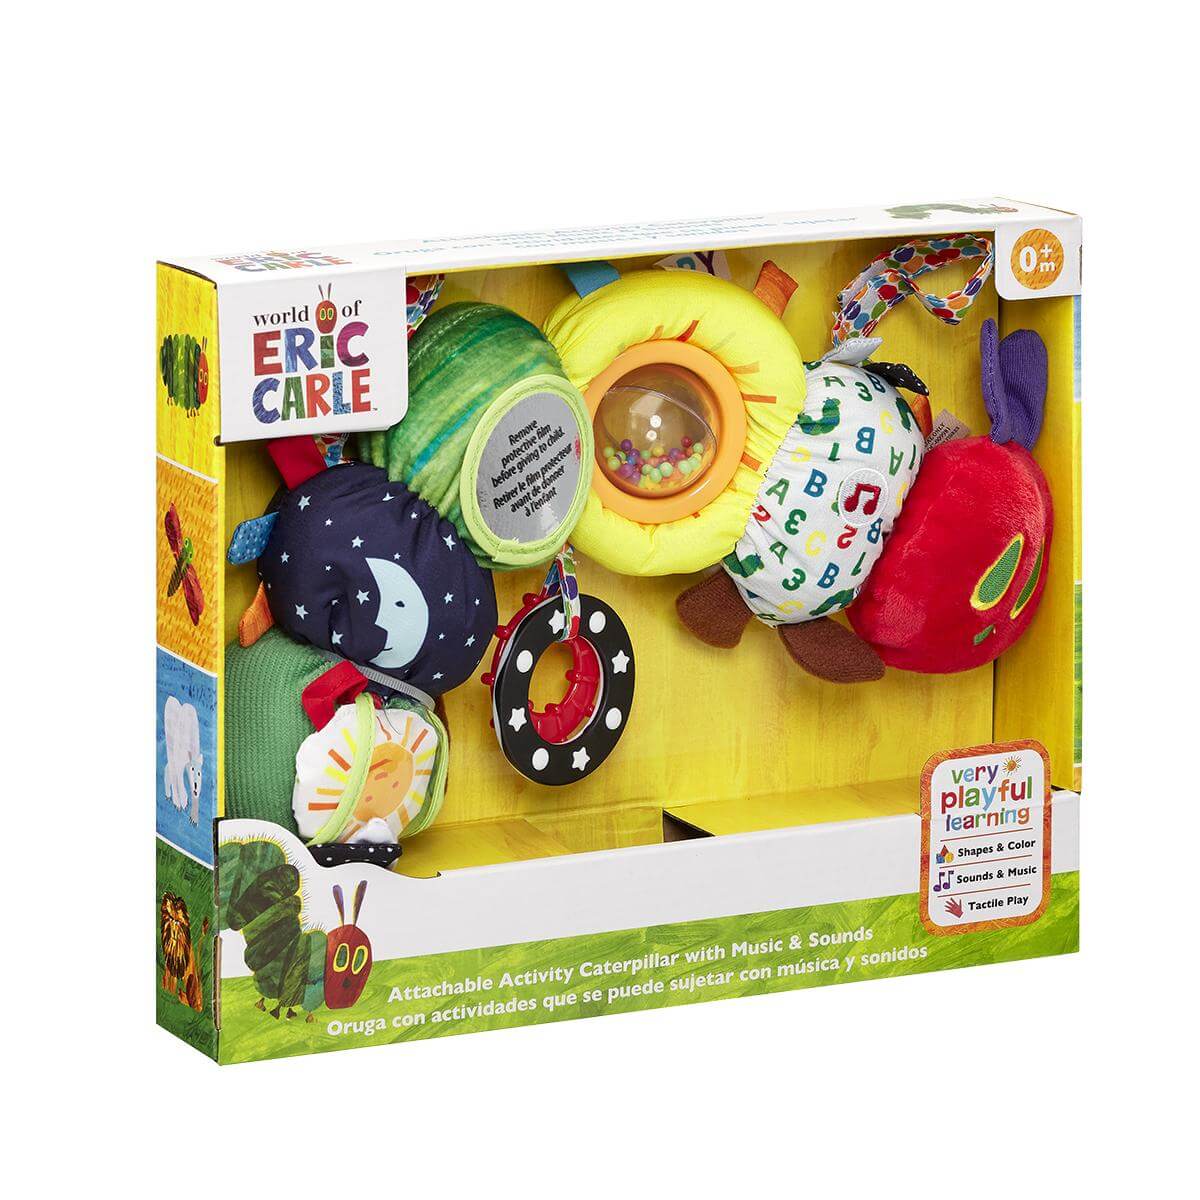 The World of Eric Carle The Very Hungry Caterpillar Large Activity Caterpillar